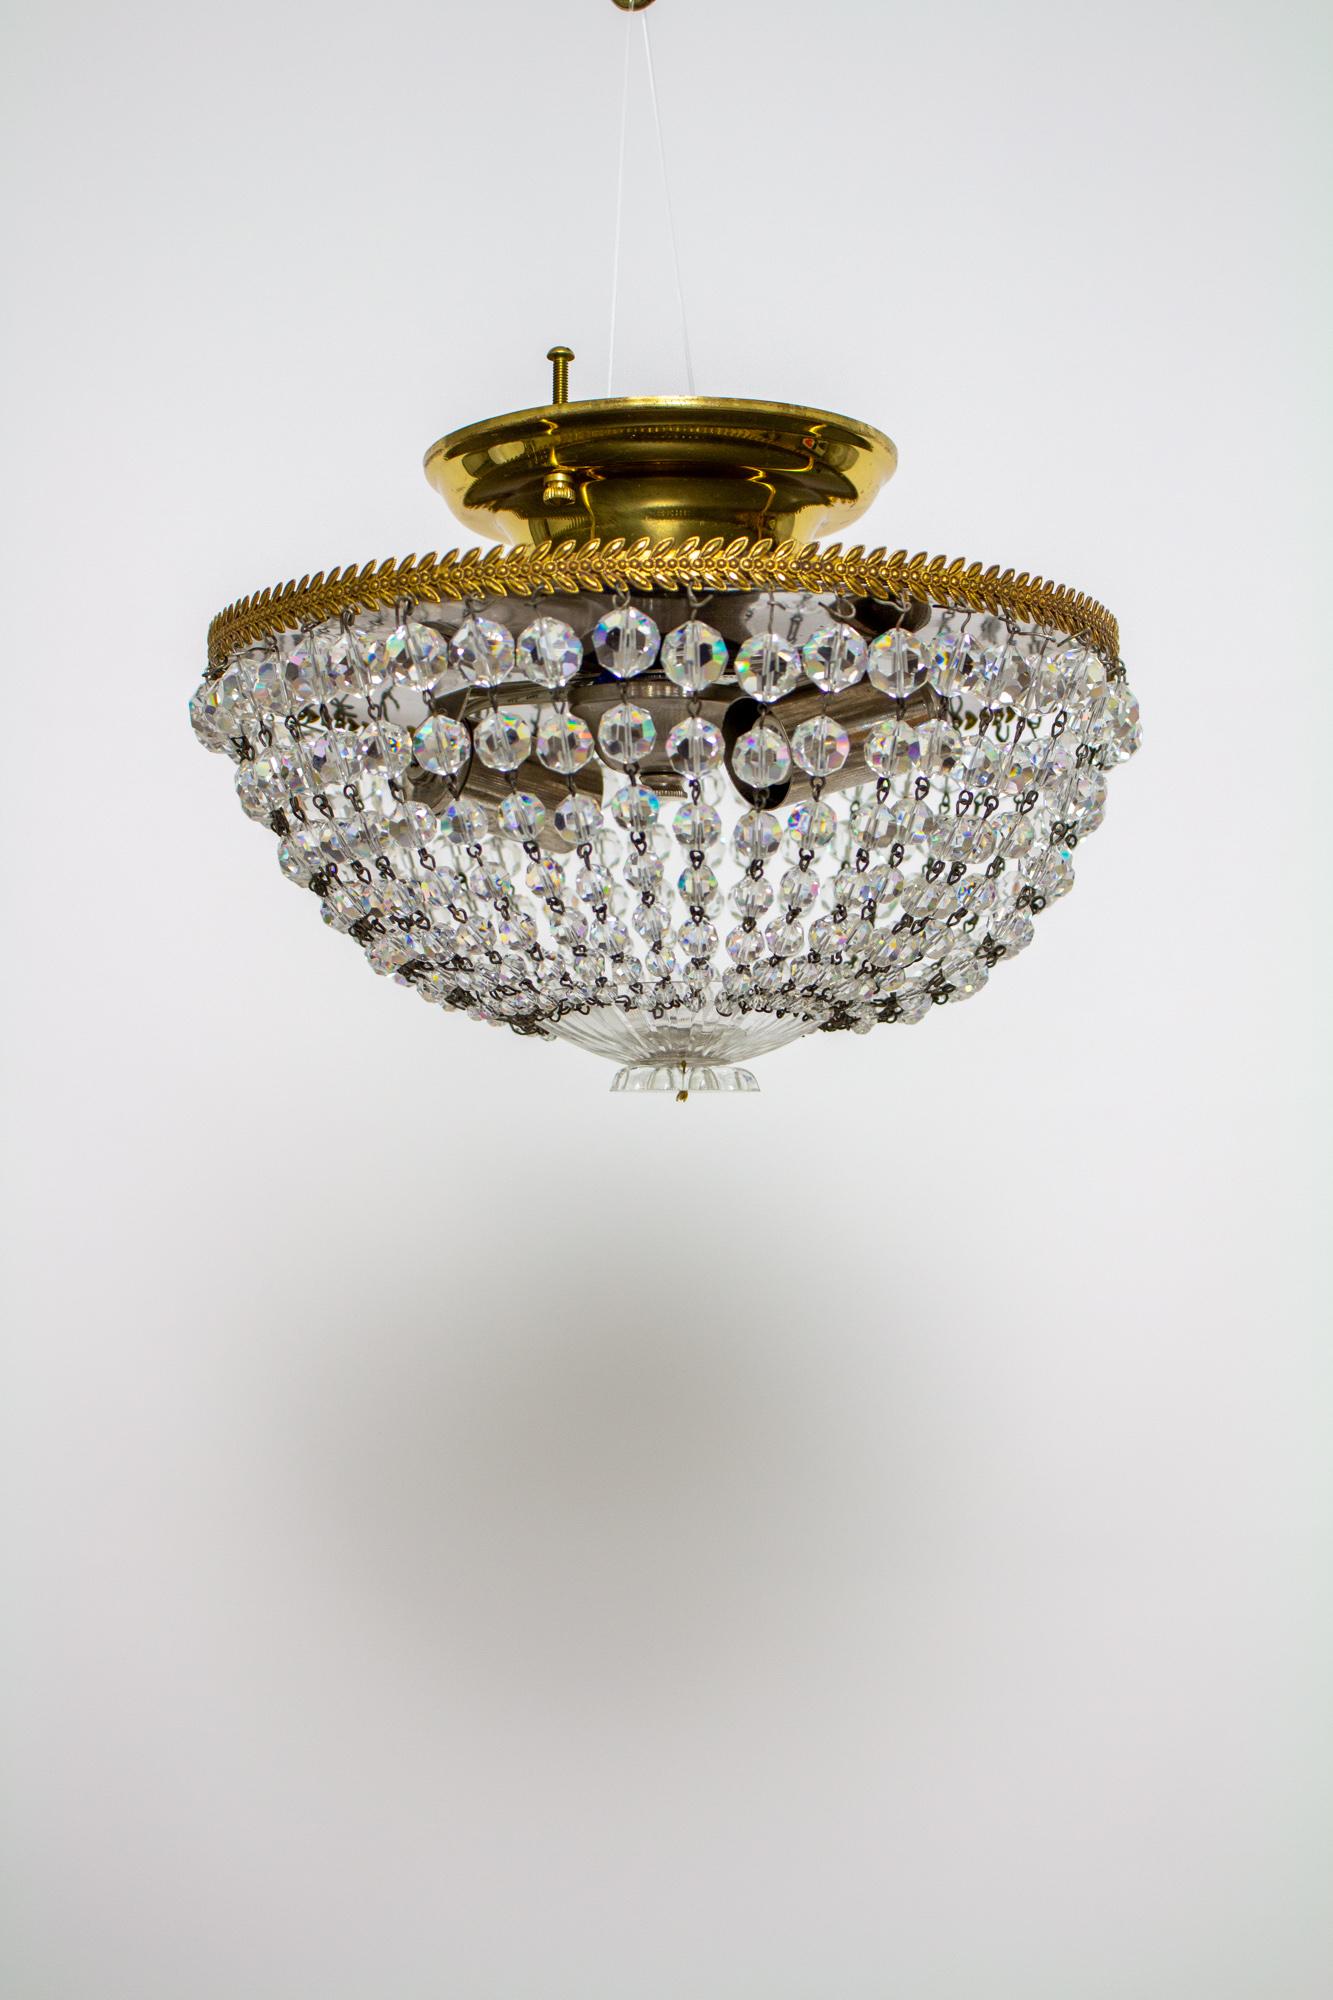 Crystal basket fixture with two lights. Ring is a stamped gold, interior is chrome plated to reflect light. Graduated strands of crystals hang from the rings and gather below, at a round cut glass dish. Cleaned and rewired, complete and ready to